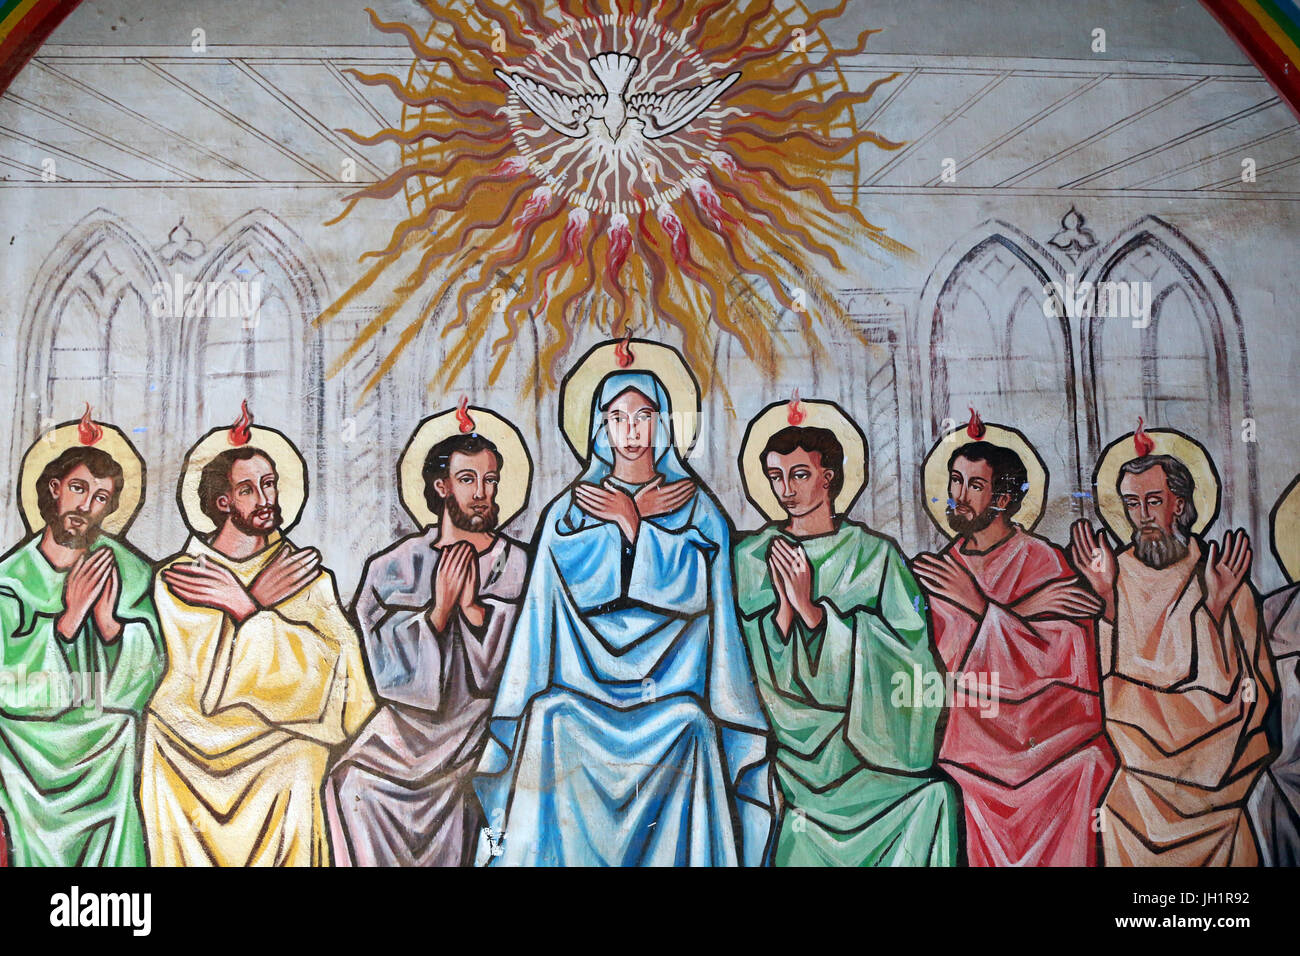 Marian sanctuary our Lady of the lake Togo.  The Holy Spirit descending on the Virgin Mary and the Apostles. Painting.  Togo. Stock Photo